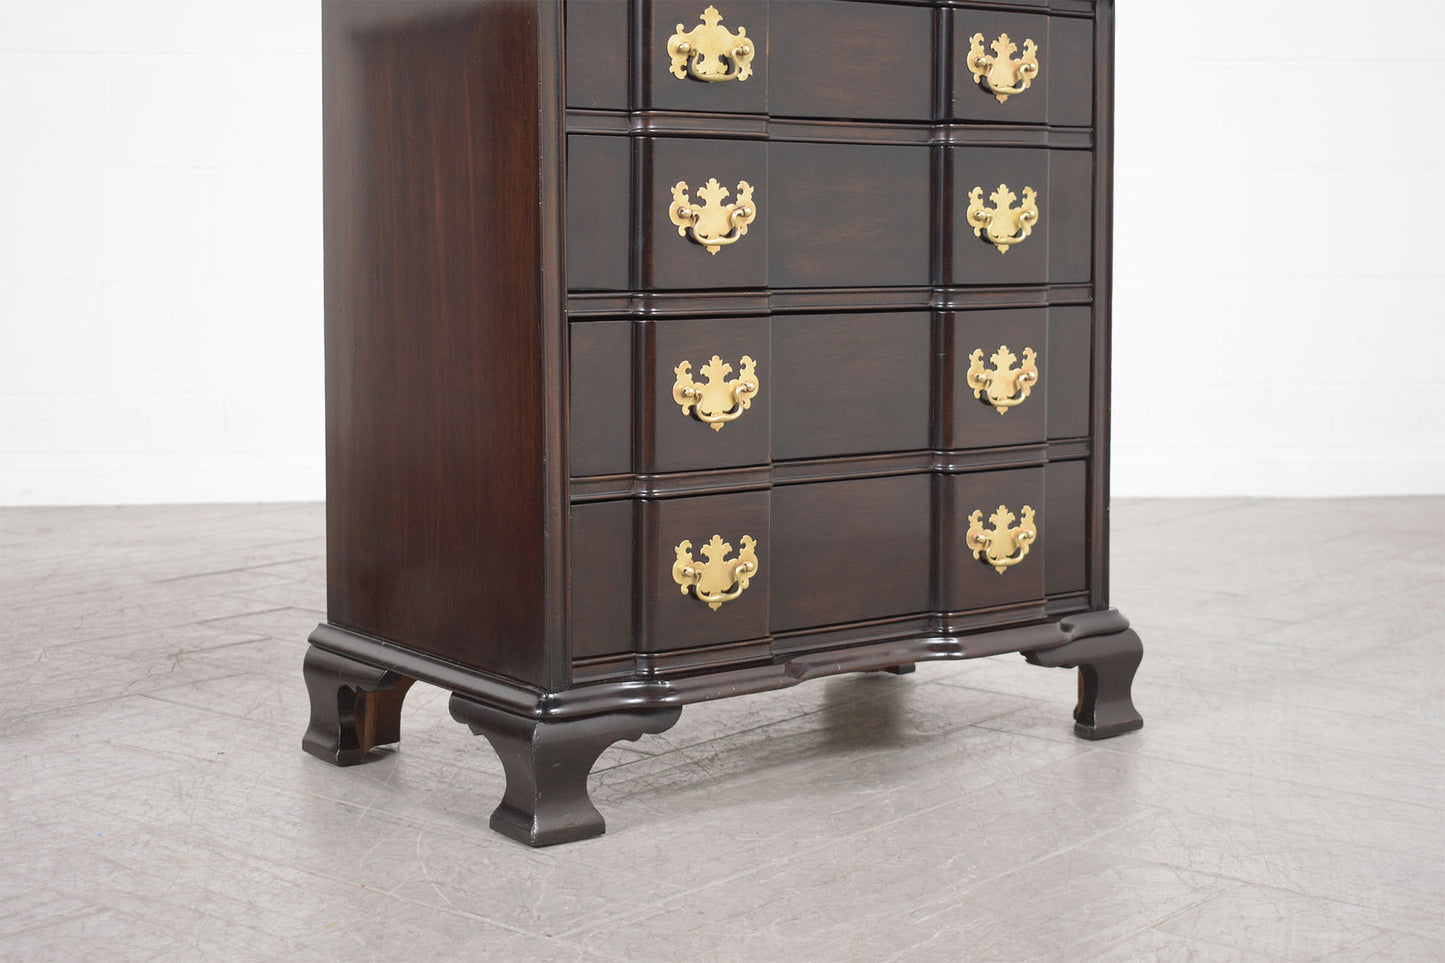 Newly Restored George III Mahogany Chest of Drawers: